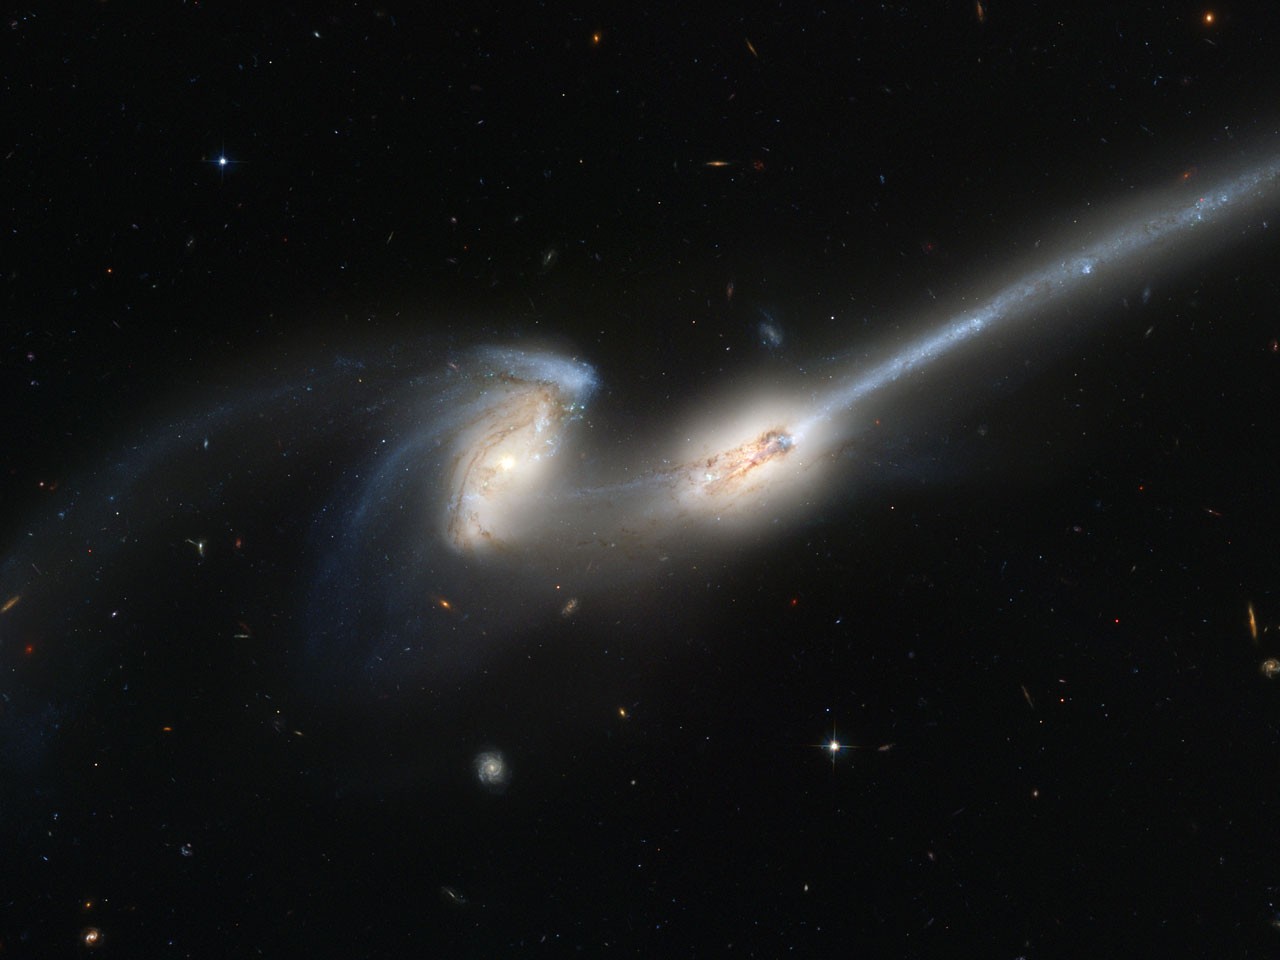 Galaxy Colliding With Another Galaxy - HD Wallpaper 